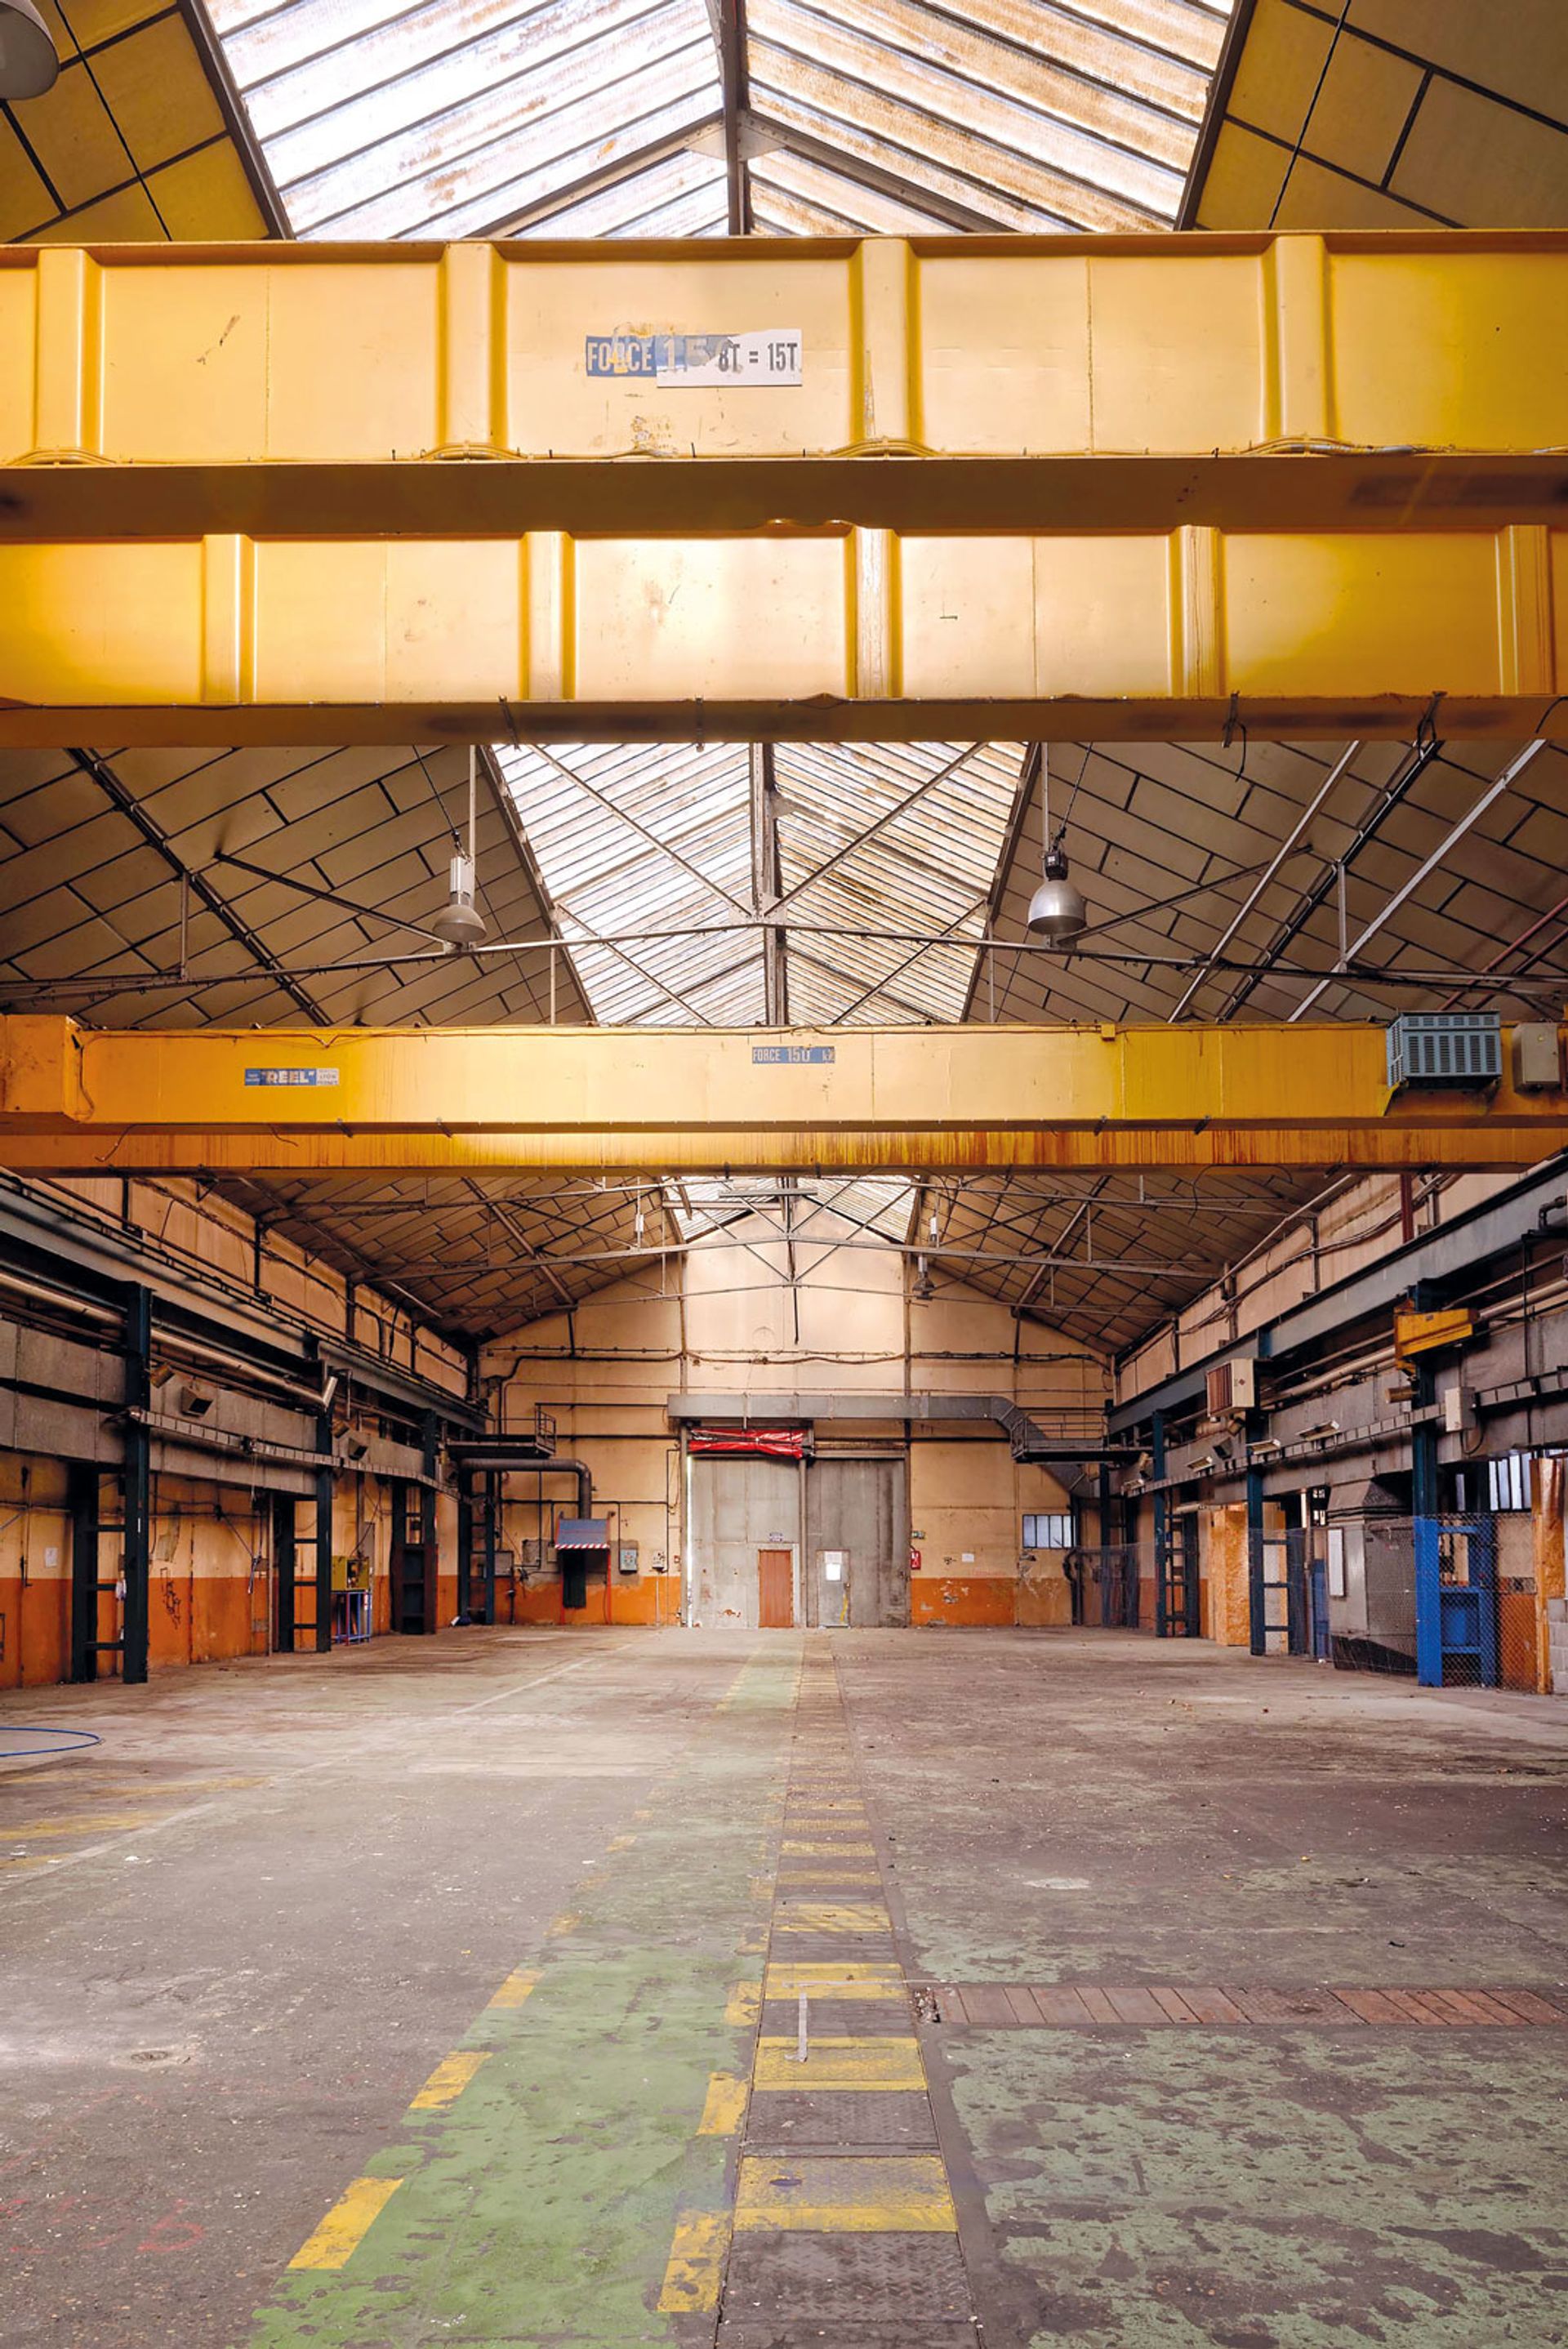 The former Fagor factory will be one of the new locations for the 15th edition of the Biennale de Lyon © Blaise Adilon